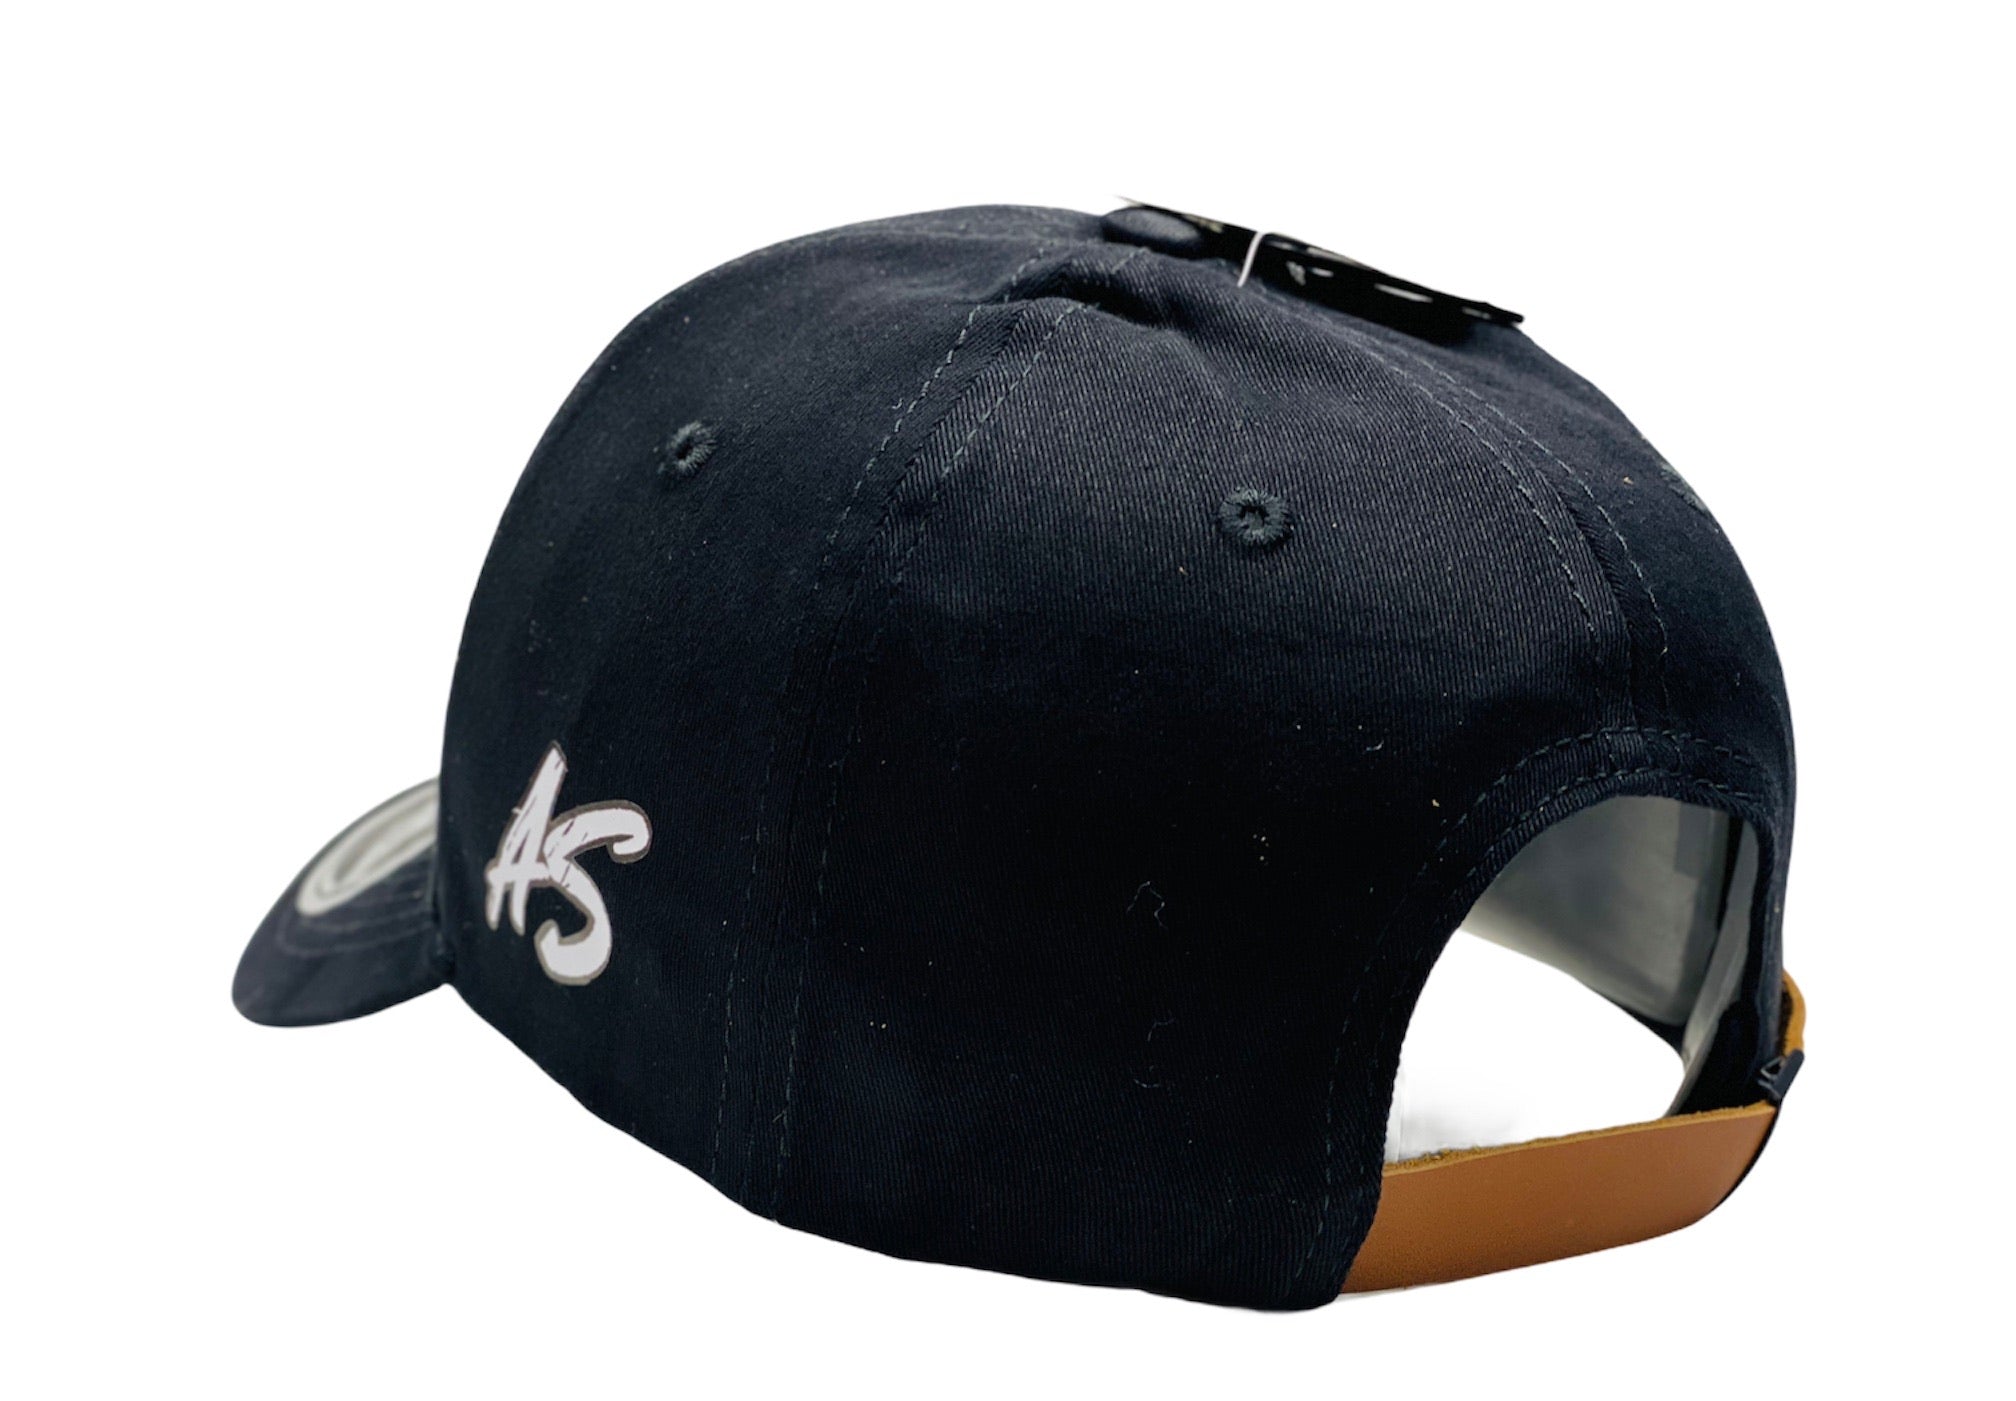 AUTOSTYLING OLD SCHOOL STRAP BACK ROLL LOW